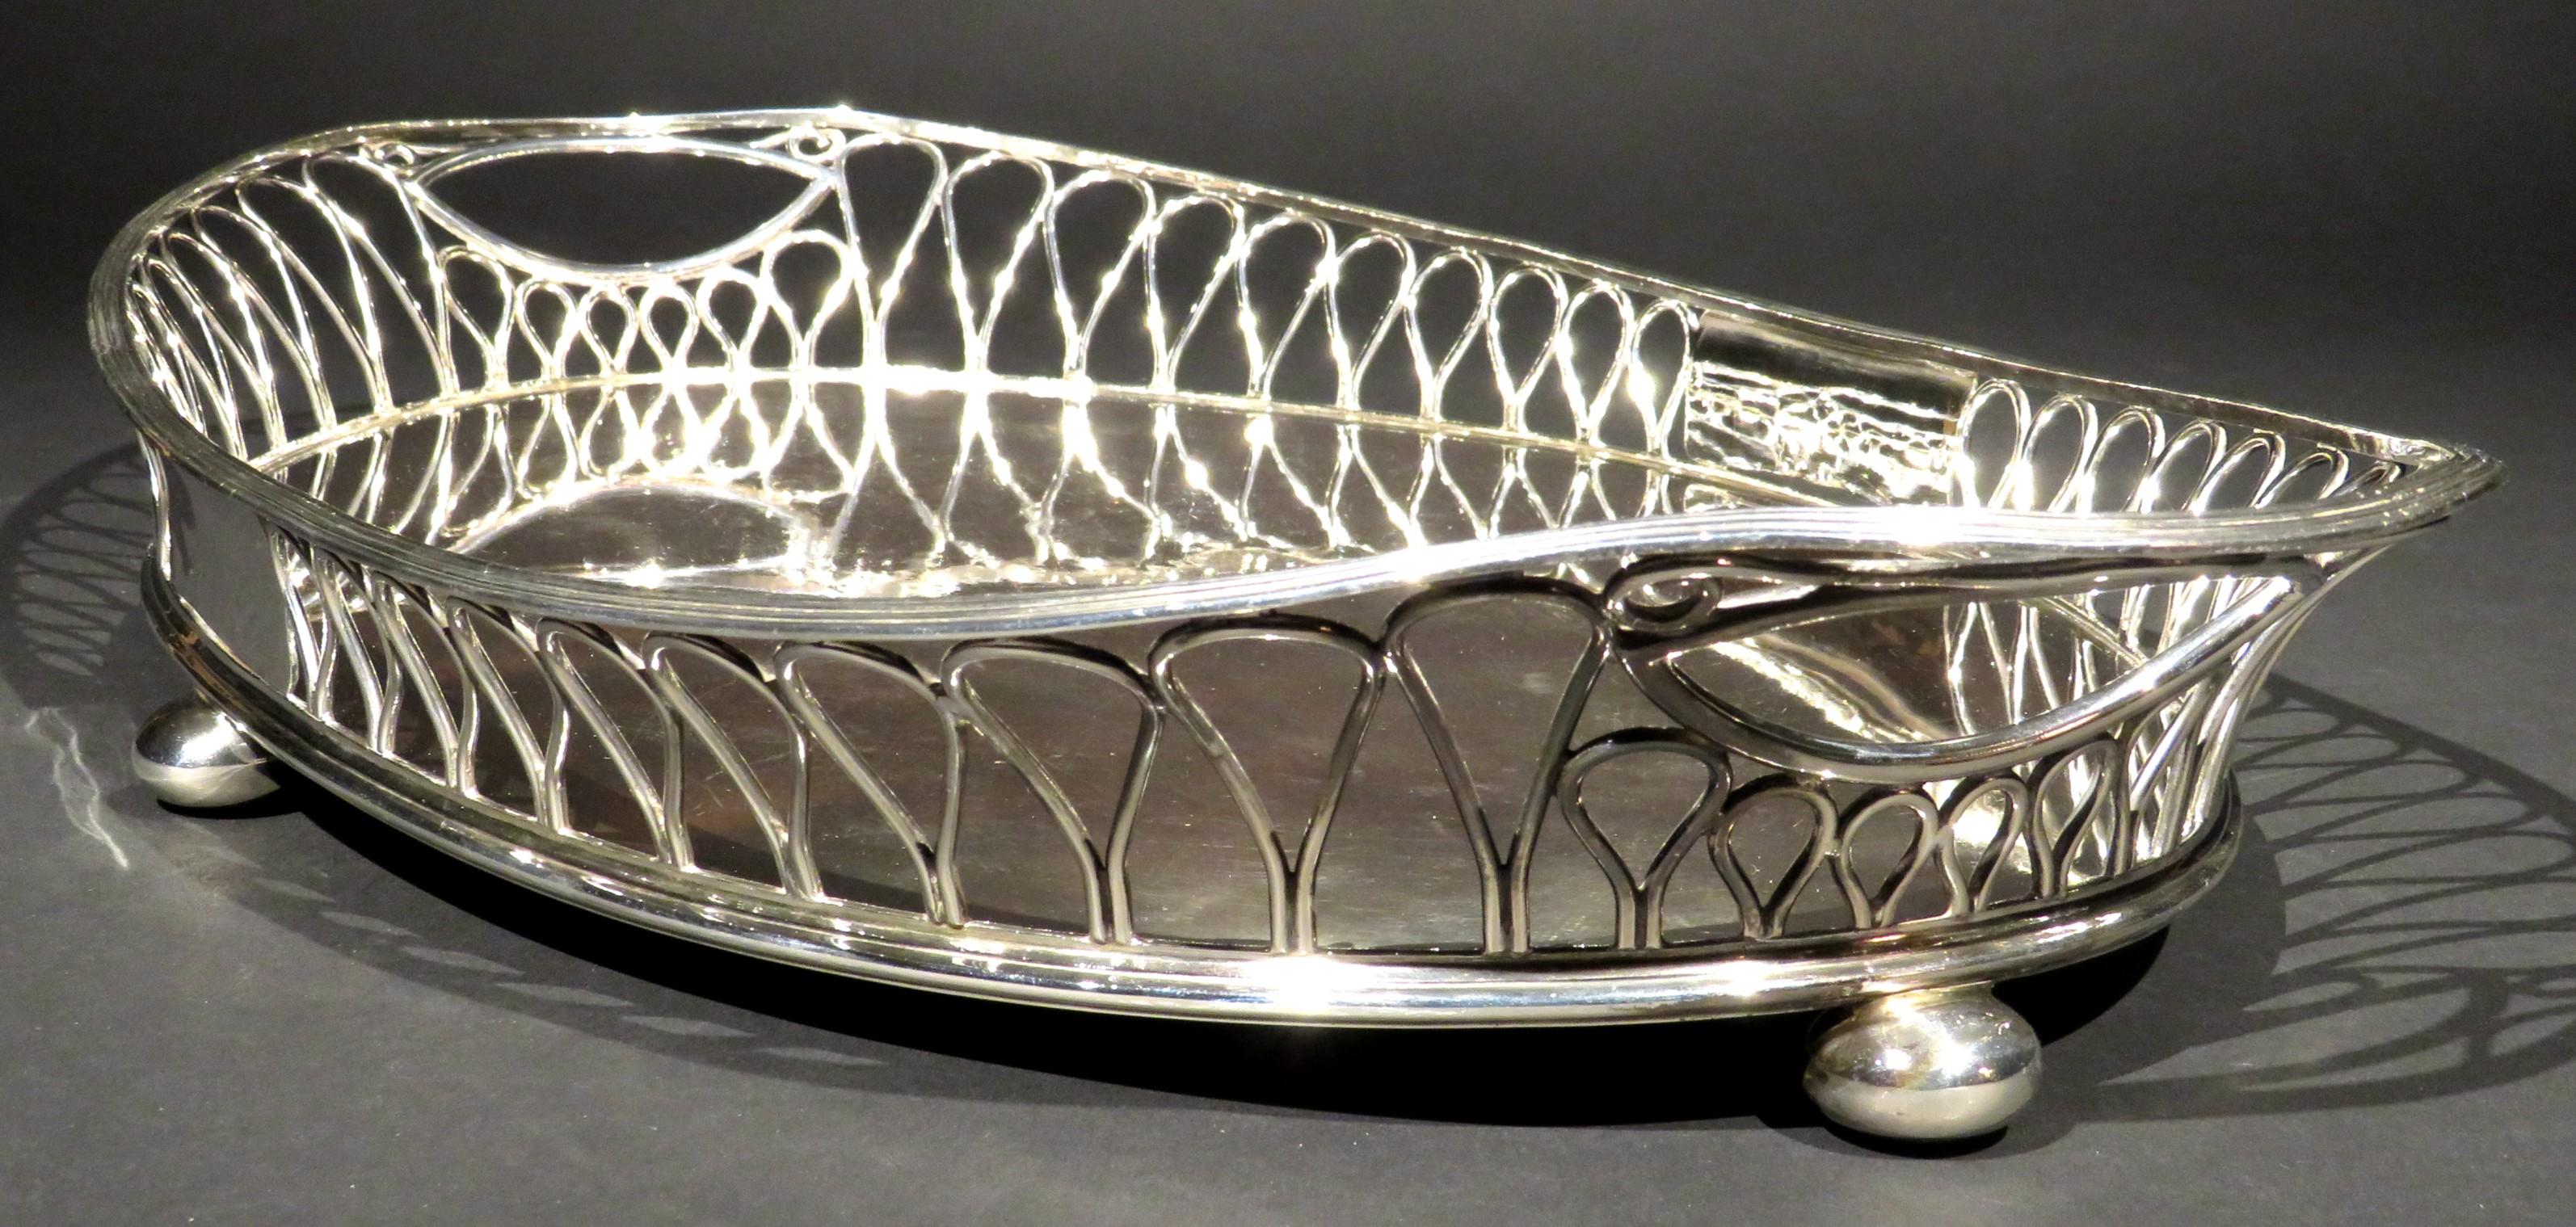 English A Very Good Art Nouveau Silver Plated Gallery Tray, England Circa 1900 For Sale